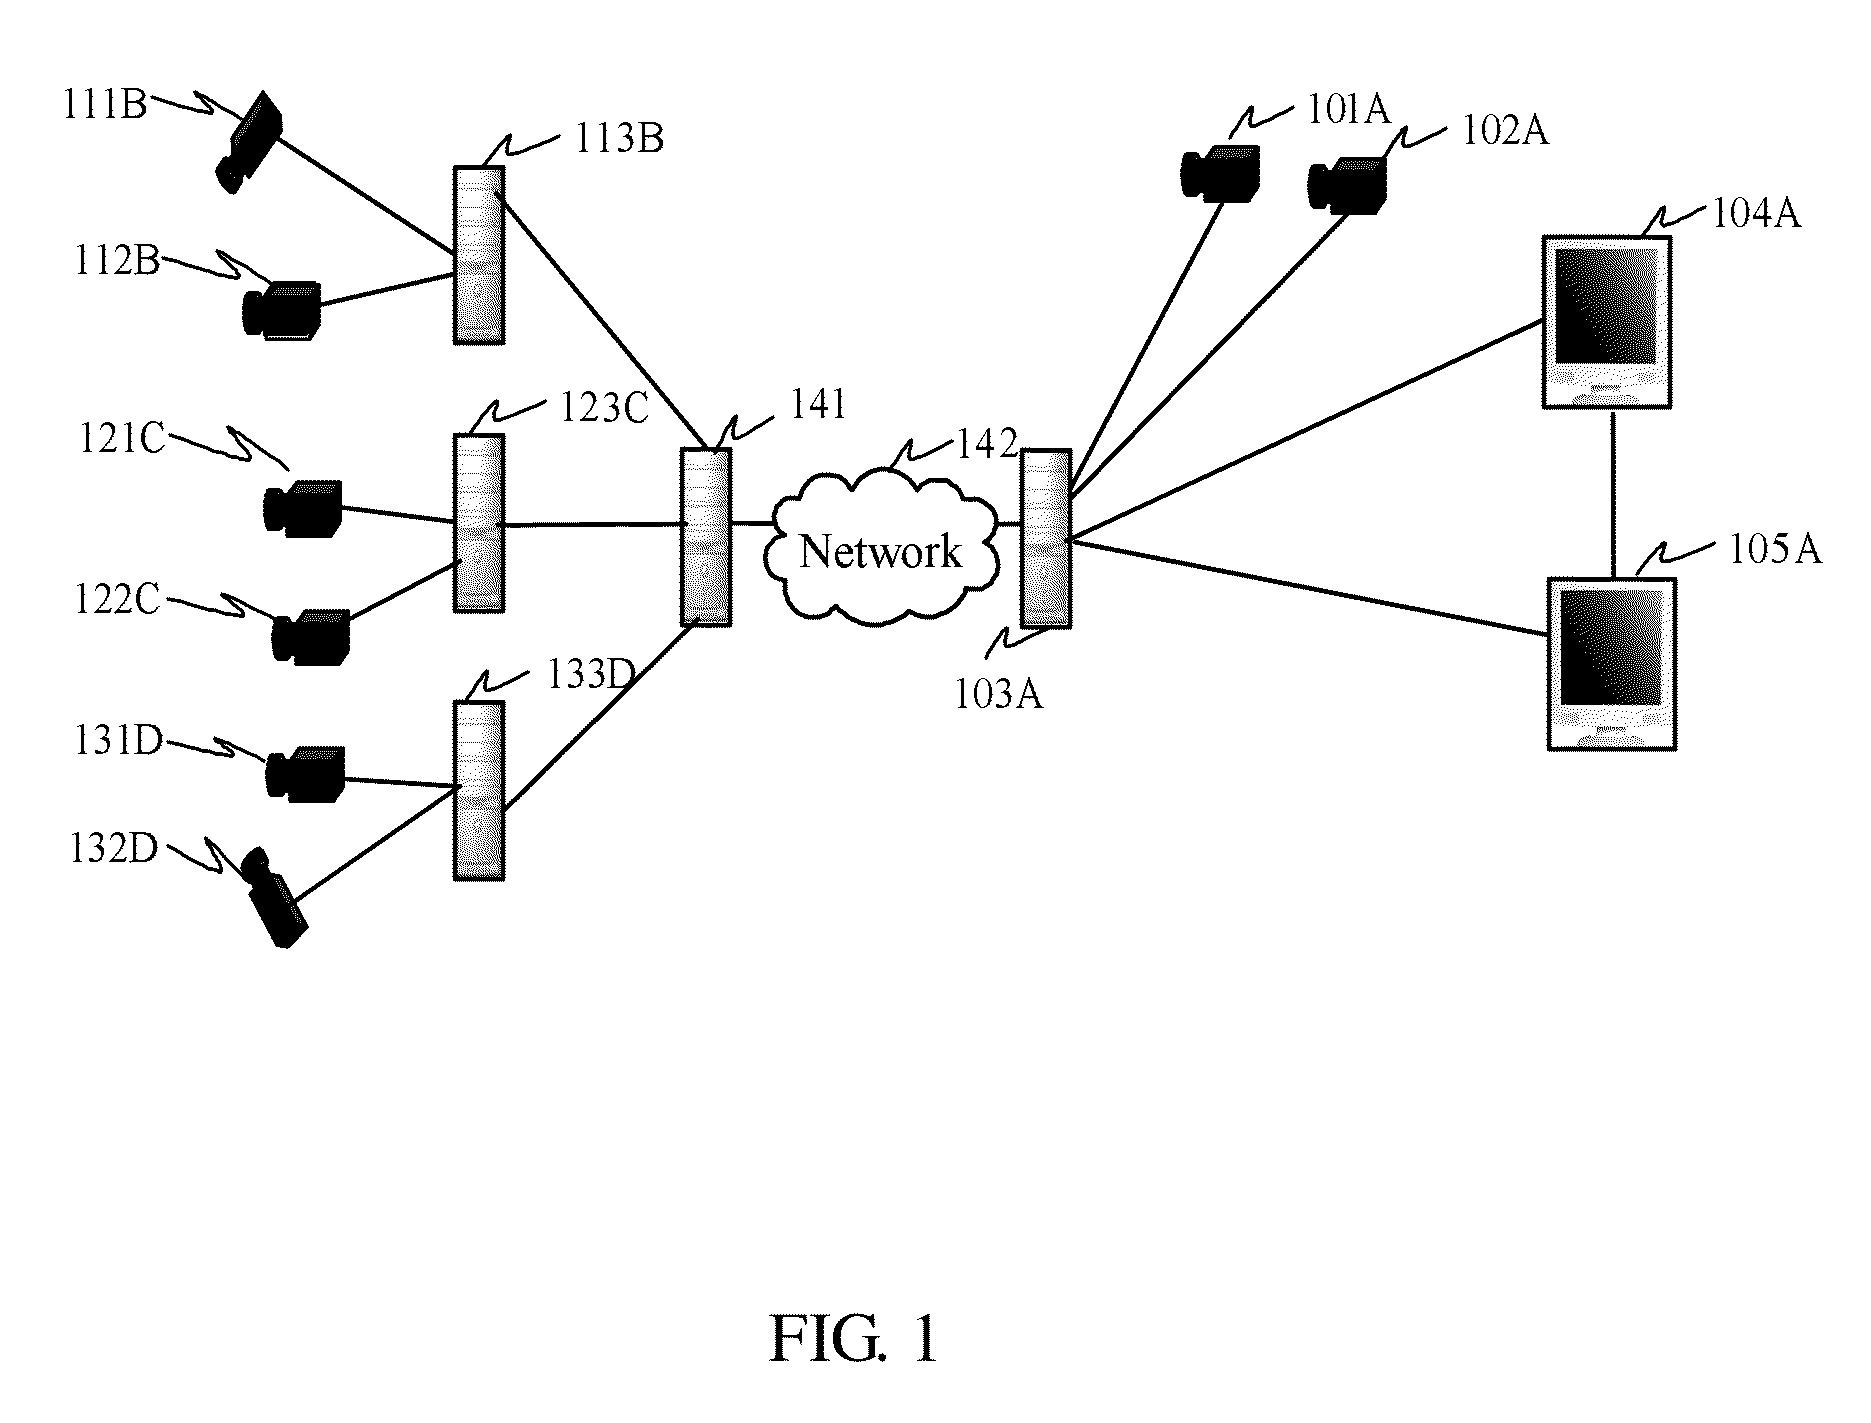 Method and device for generating 3D panoramic video streams, and videoconference method and device